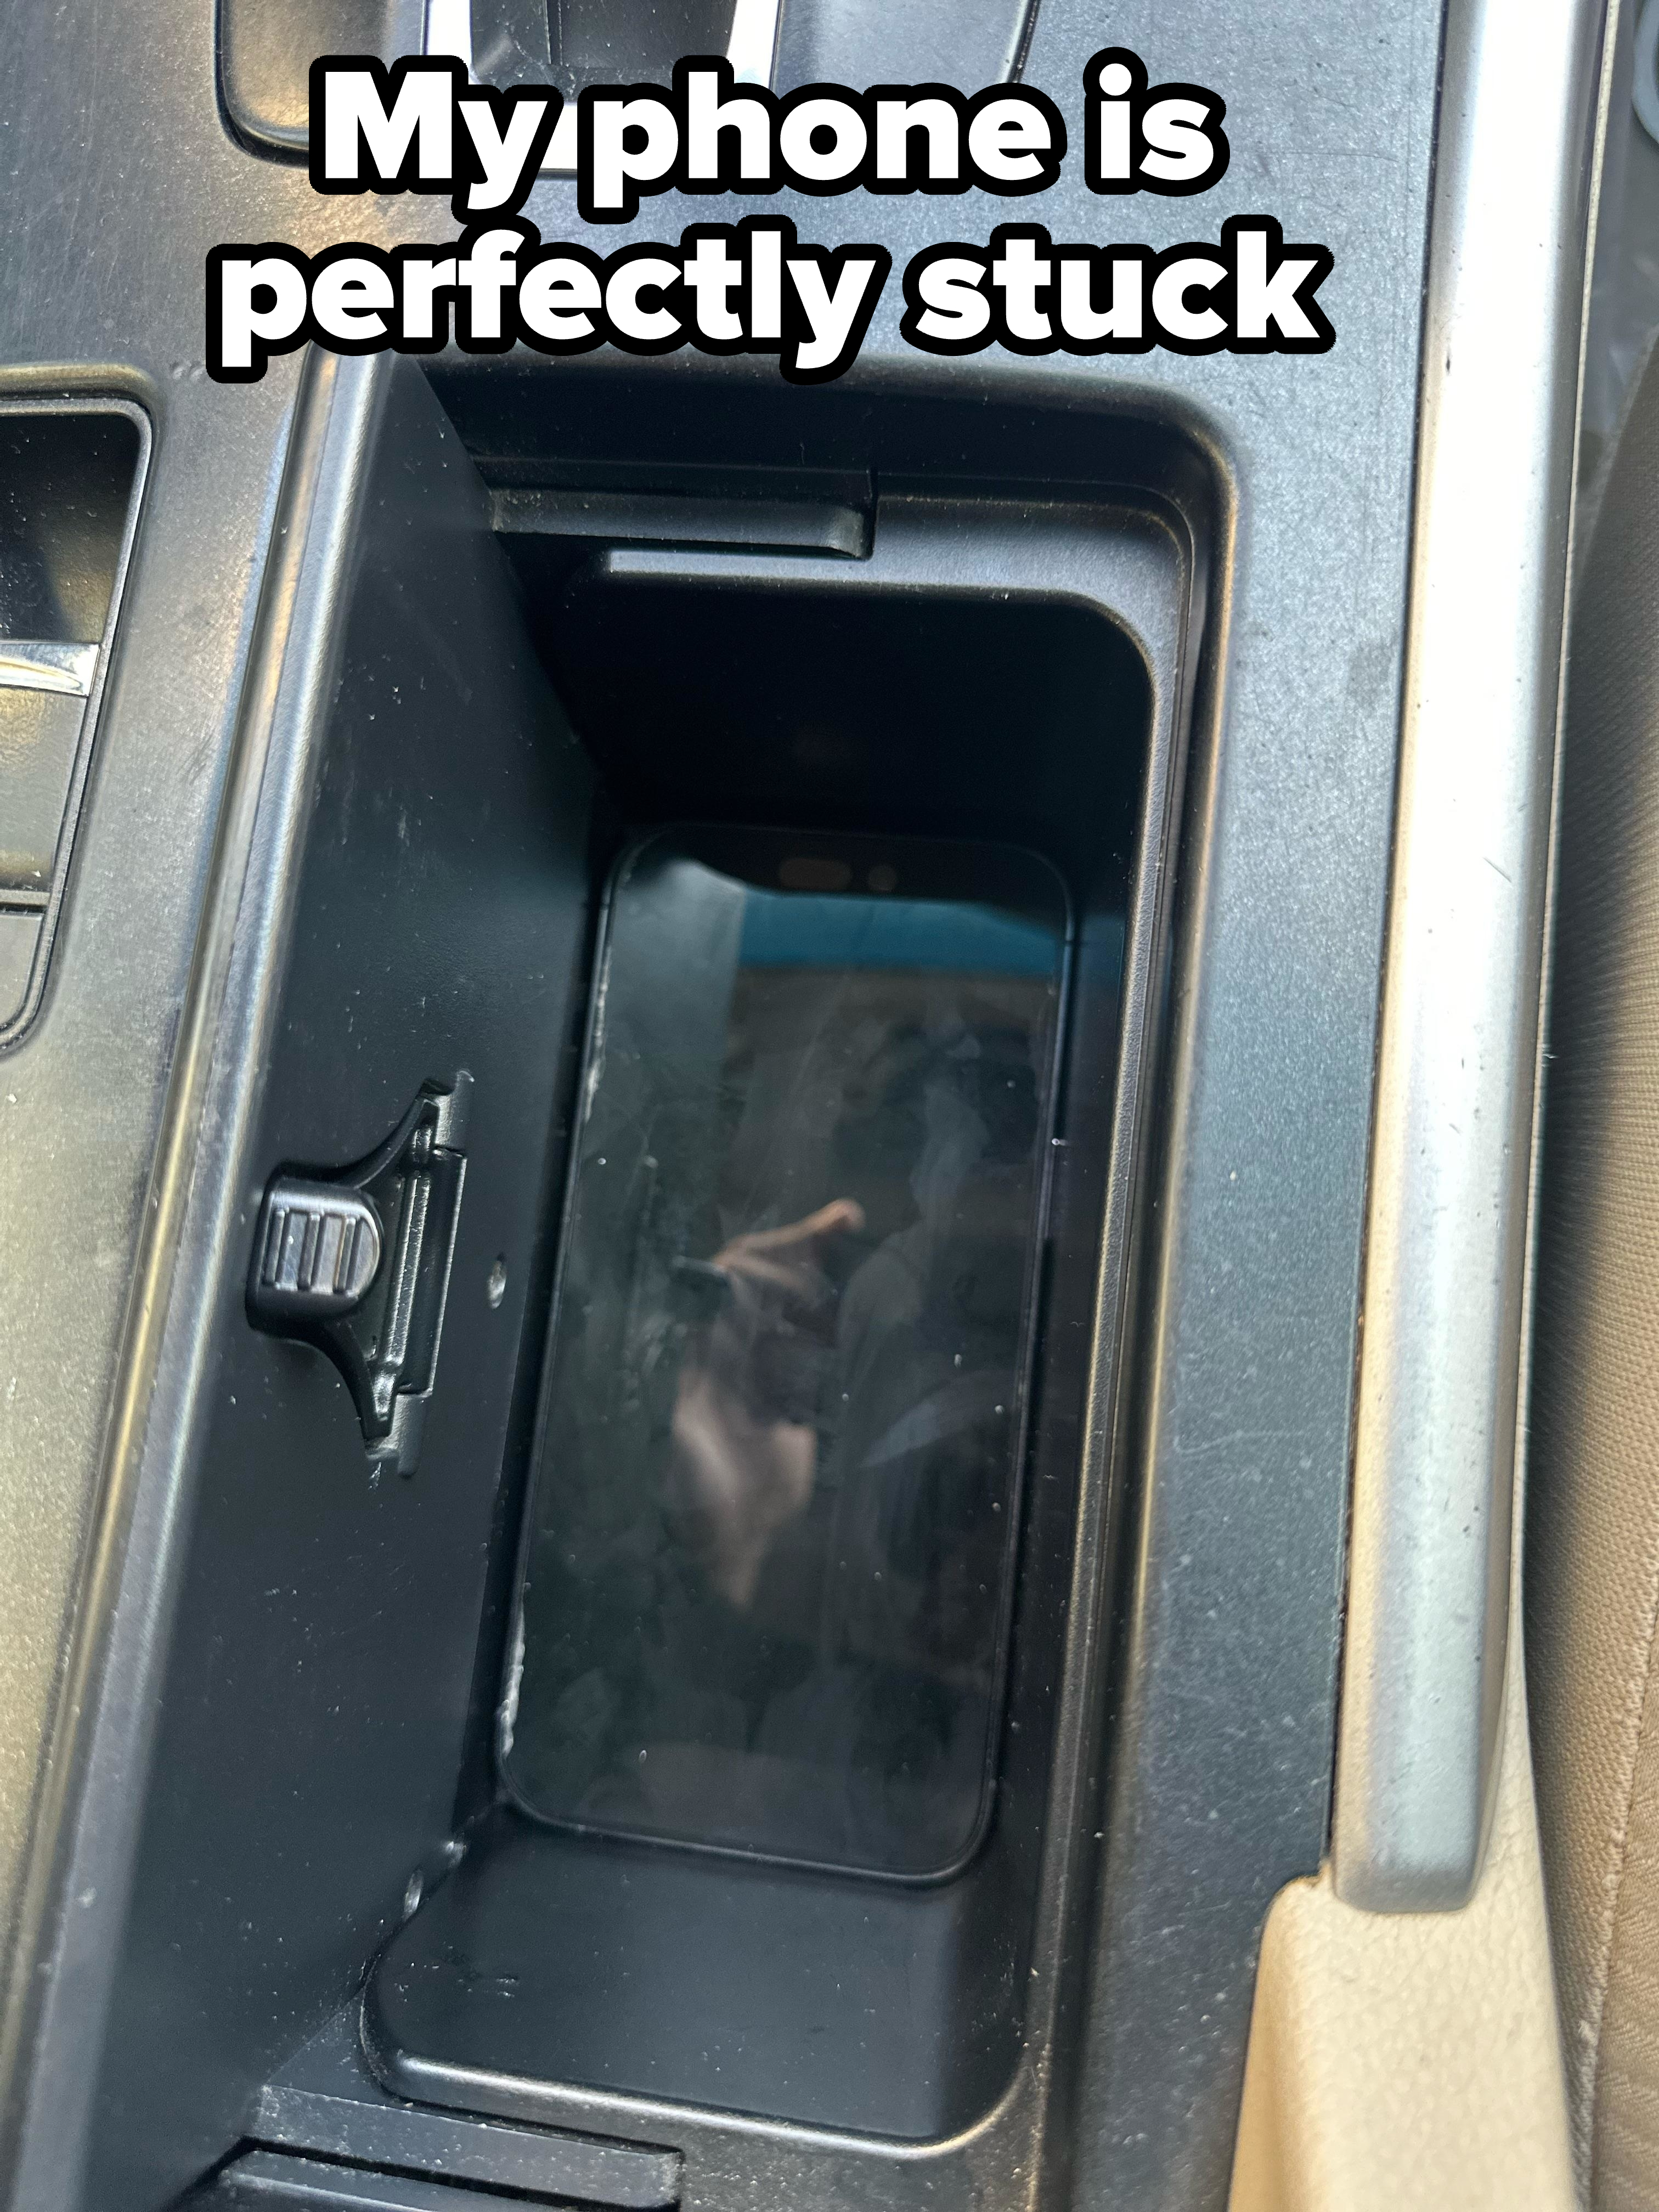 &quot;My phone is perfectly stuck.&quot;